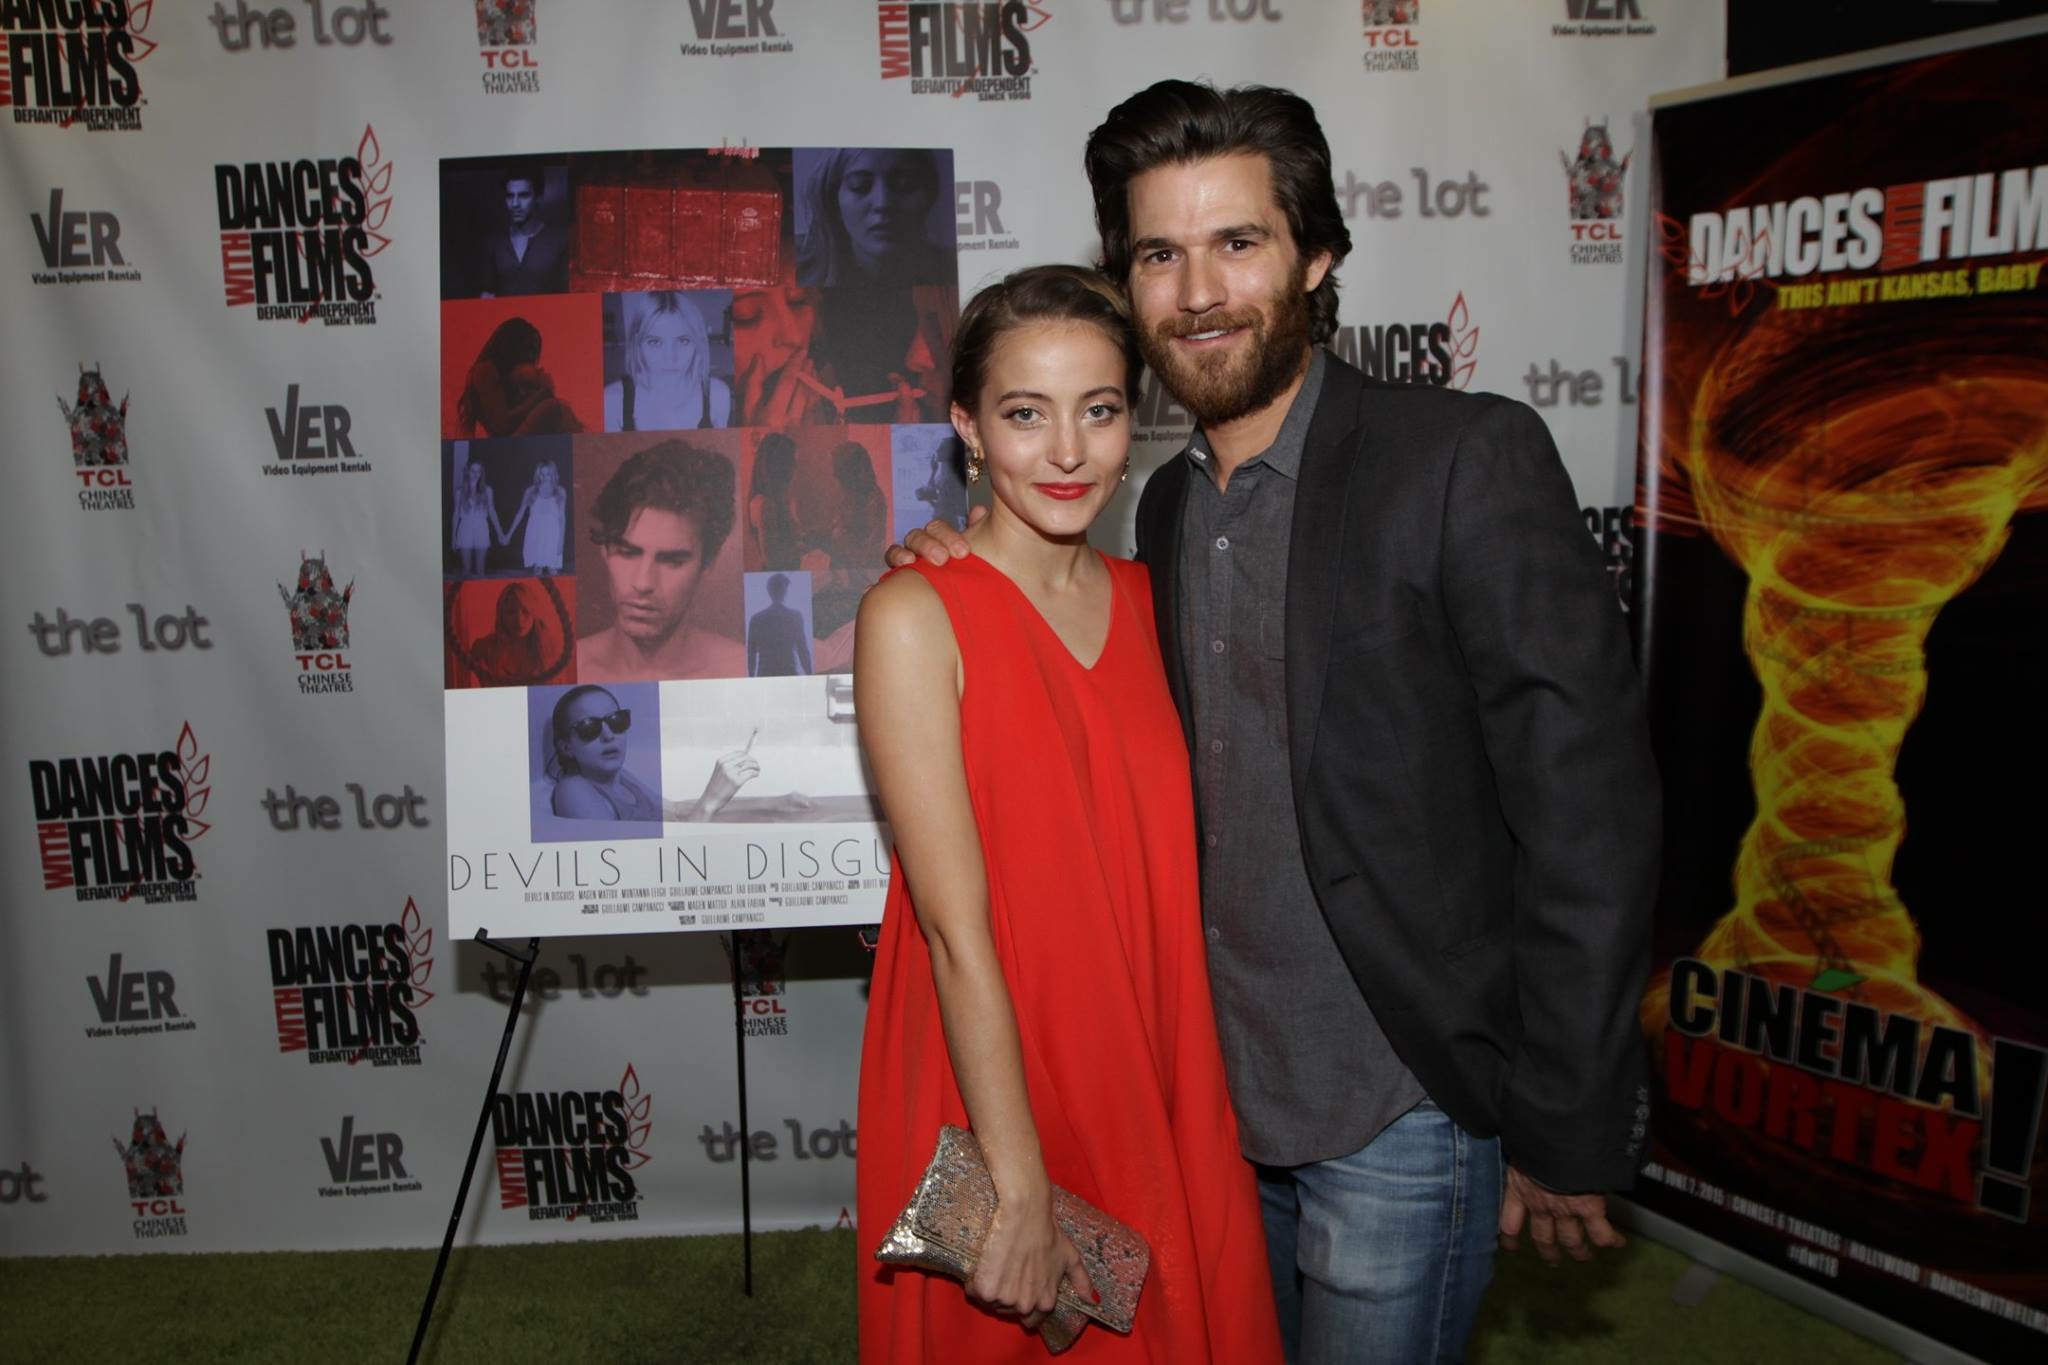 Devils in Disguise World Premier, 2015 Dances with Films Festival at the TCL Chinese Theaters accompanied by Johnny Whitworth.